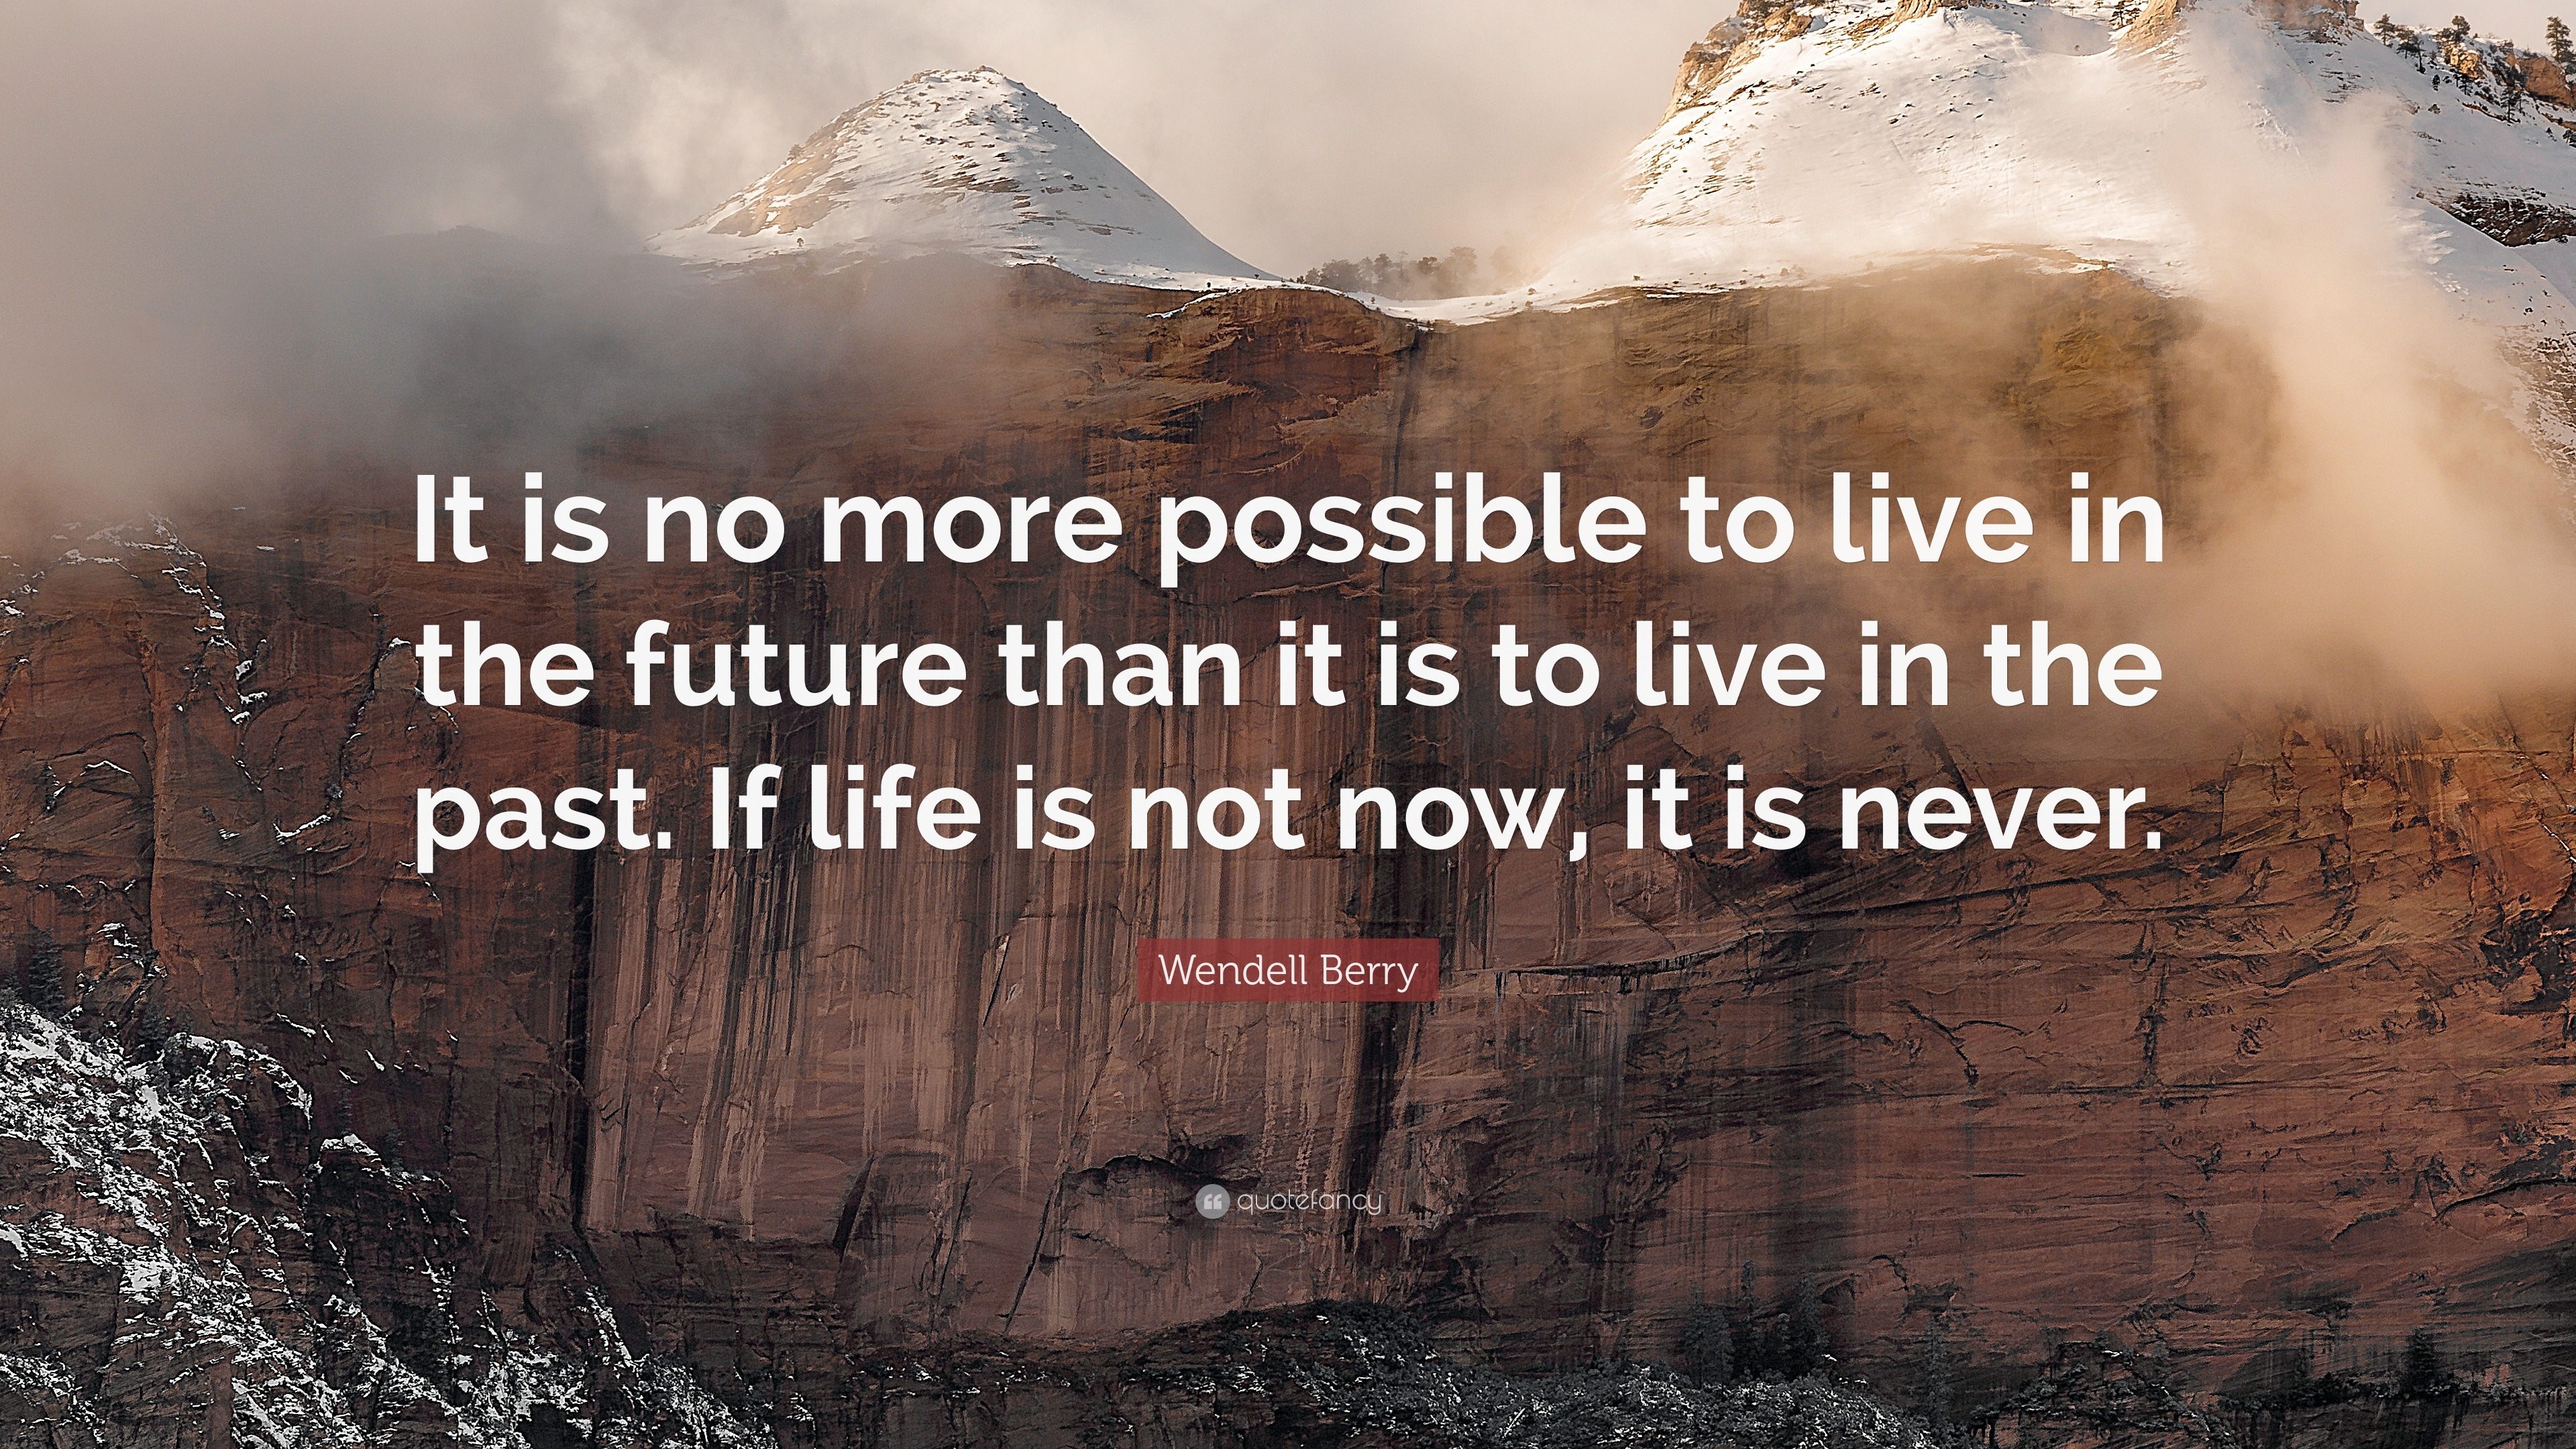 Wendell Berry Quote: “It is no more possible to live in the future than ...